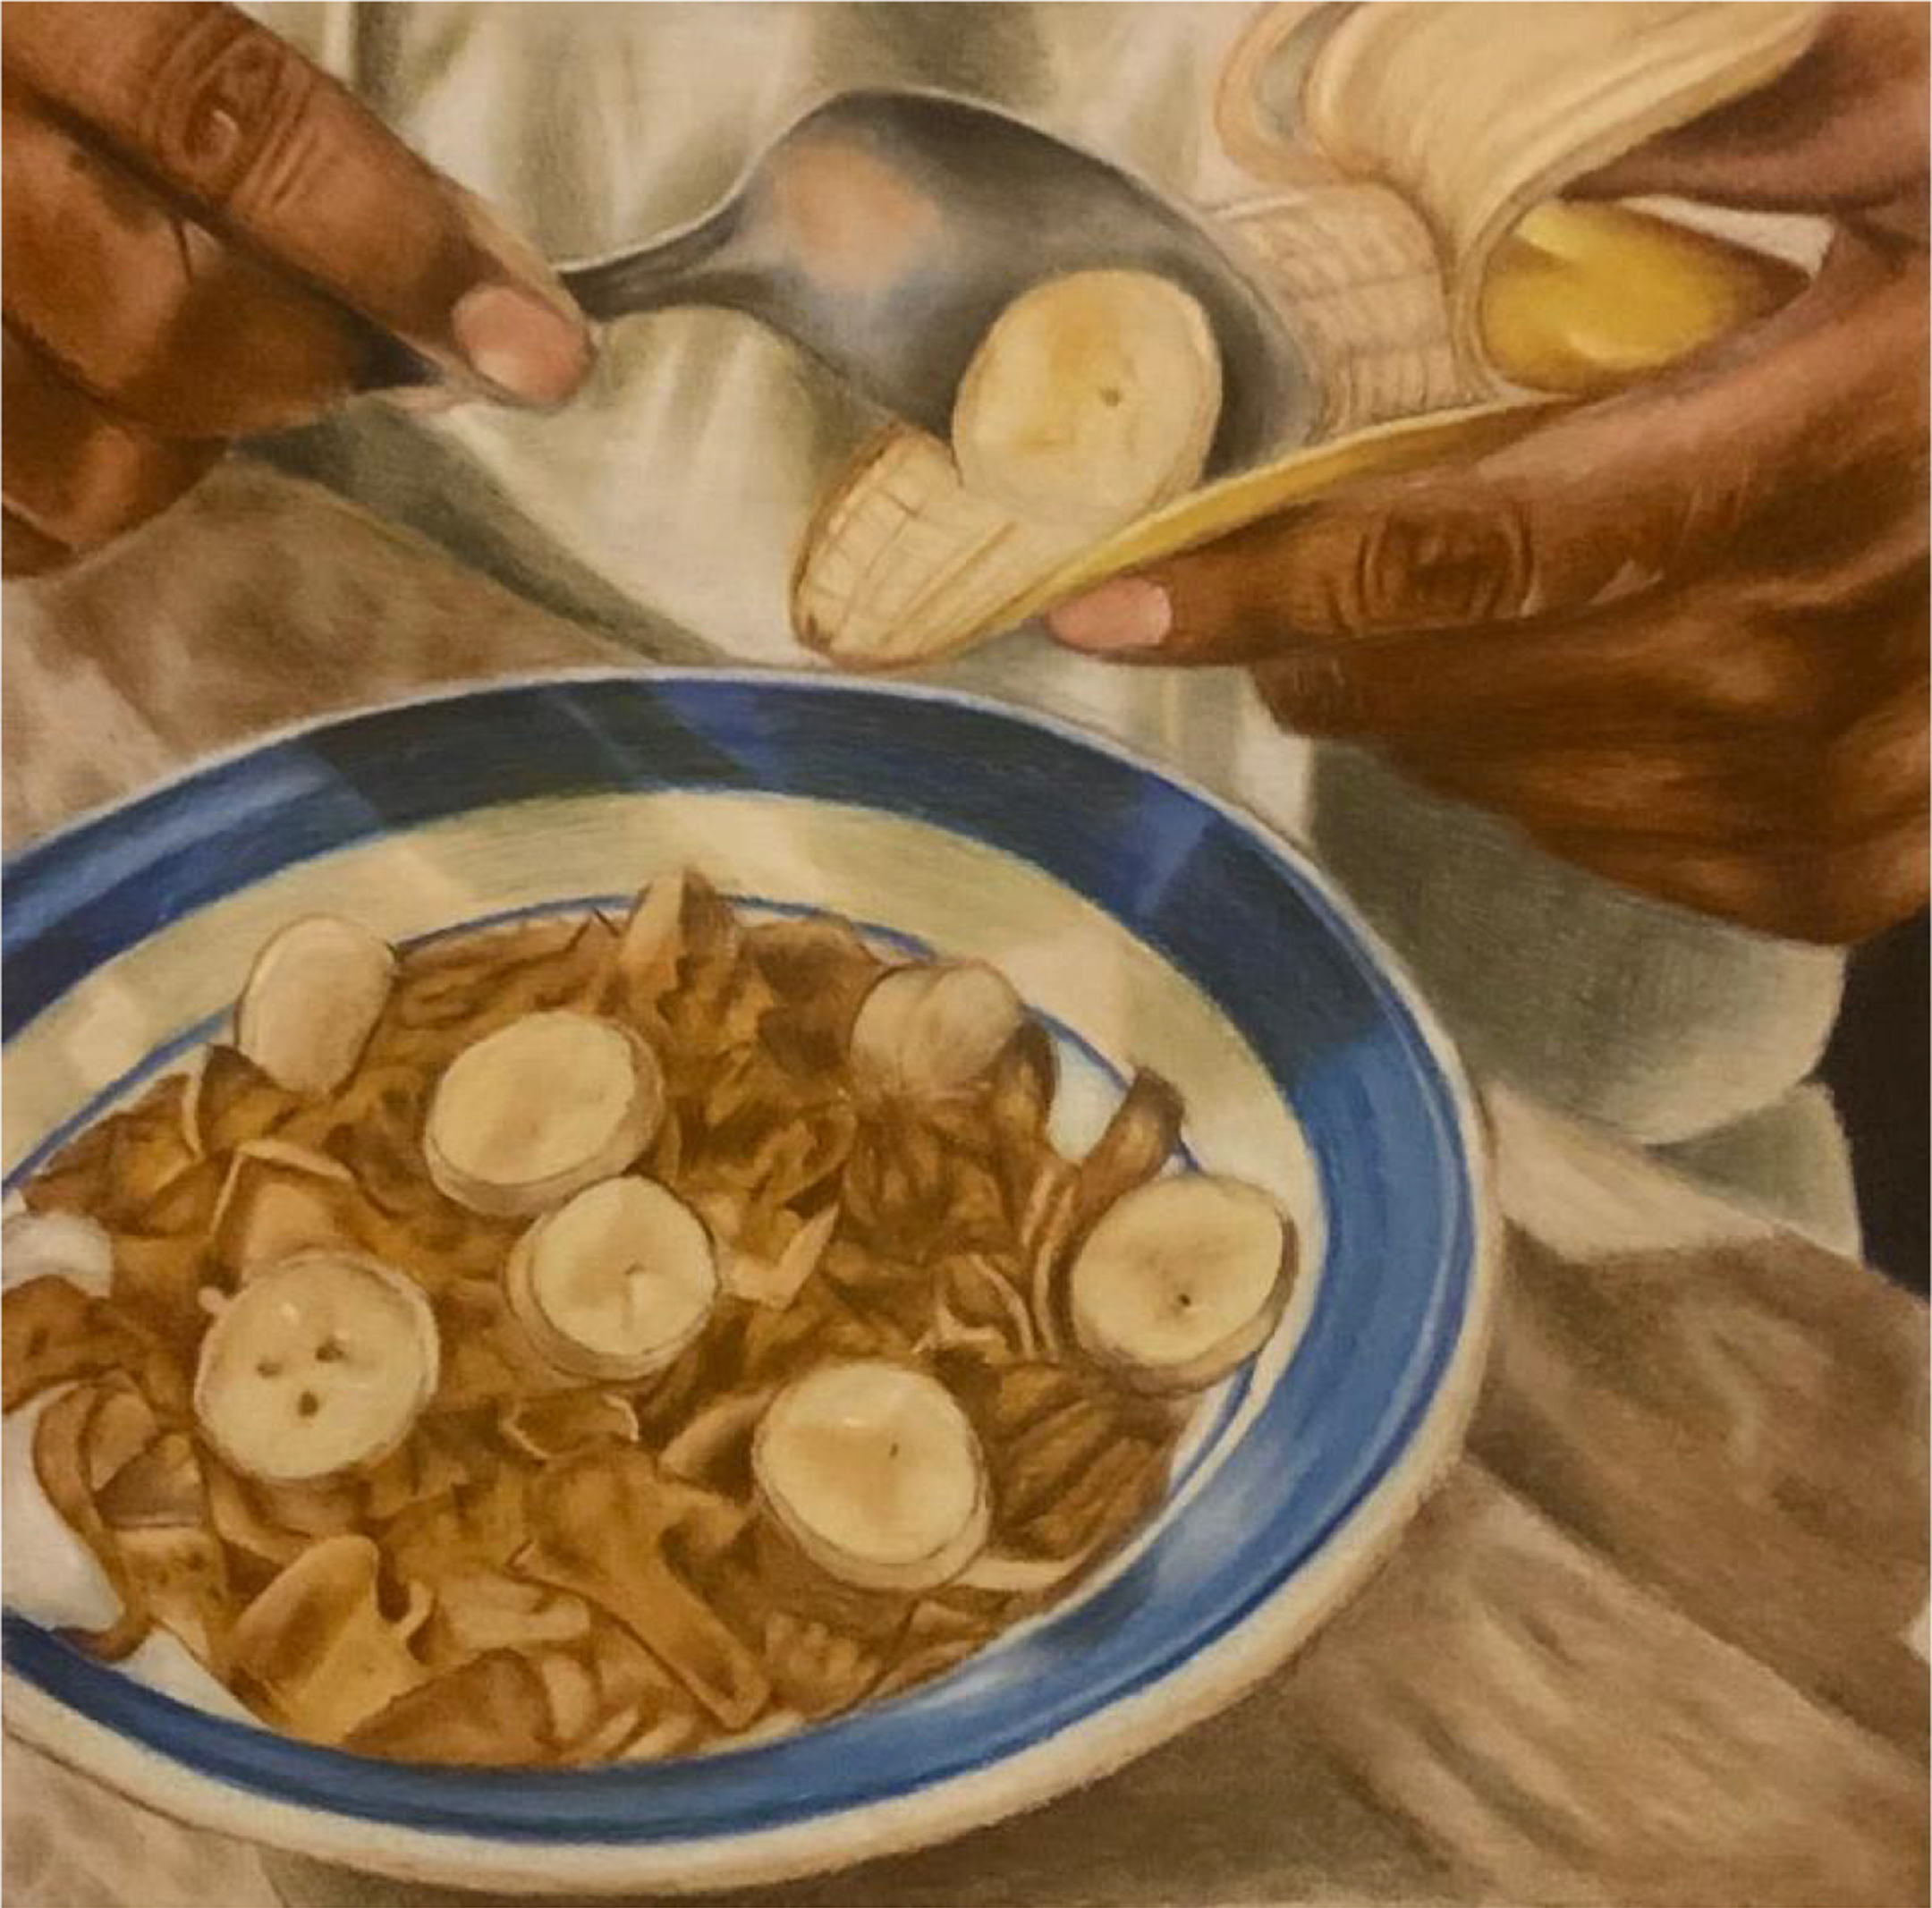 close-up illustration of a hand scooping sliced bananas out of the peel into a bowl of cereal